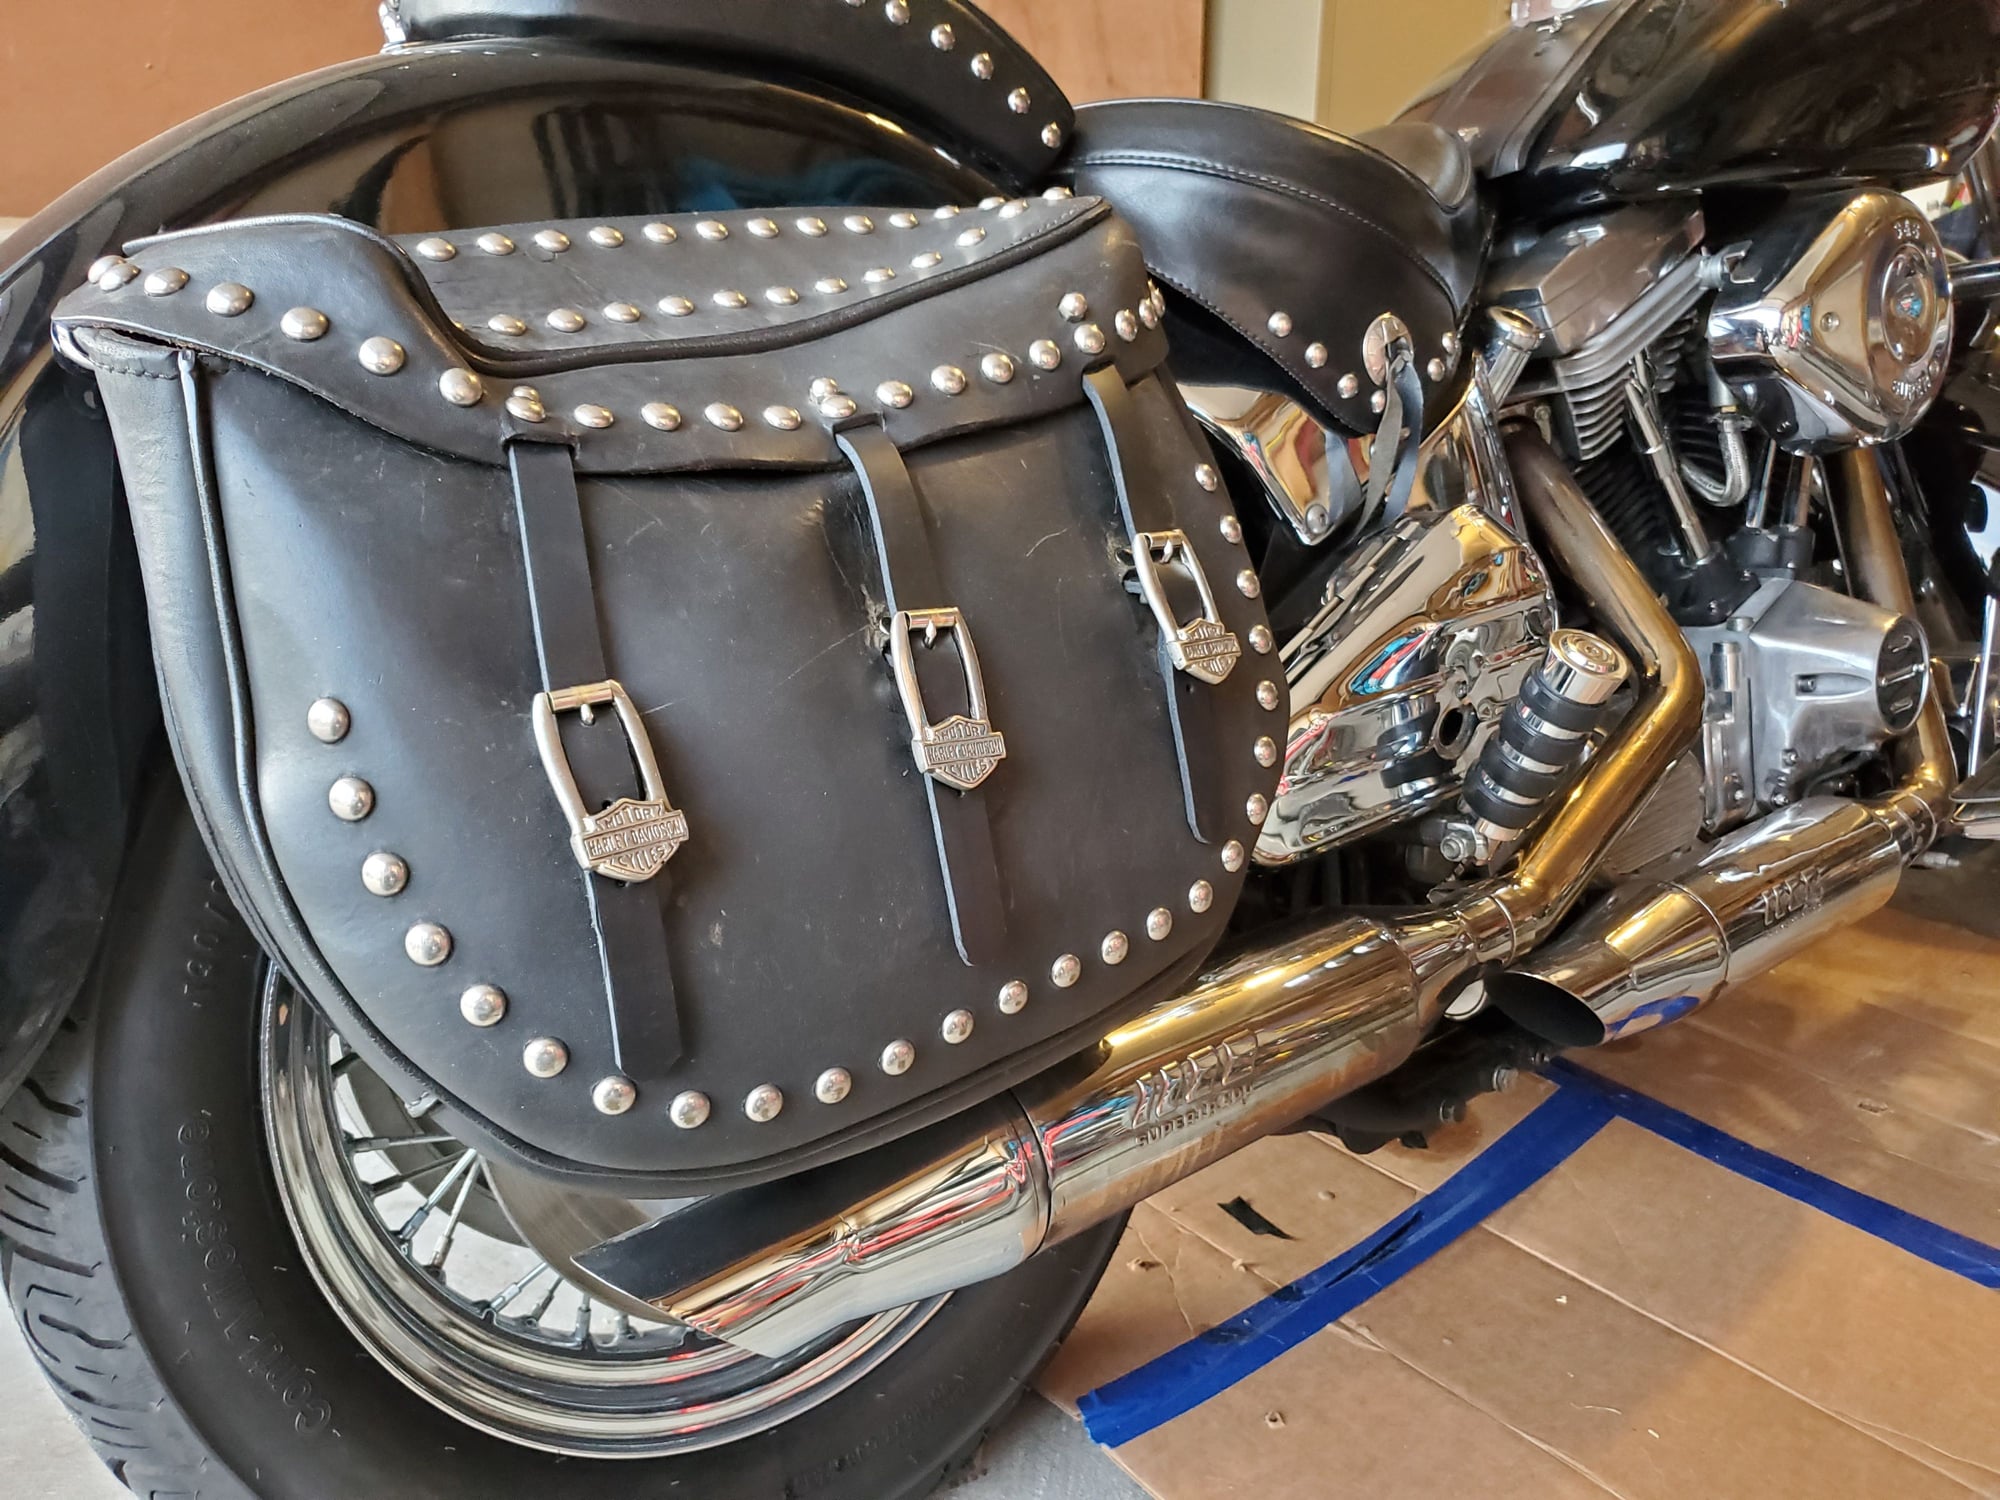 Two Replacement Saddlebag Straps for H-D Heritage Softail Classic